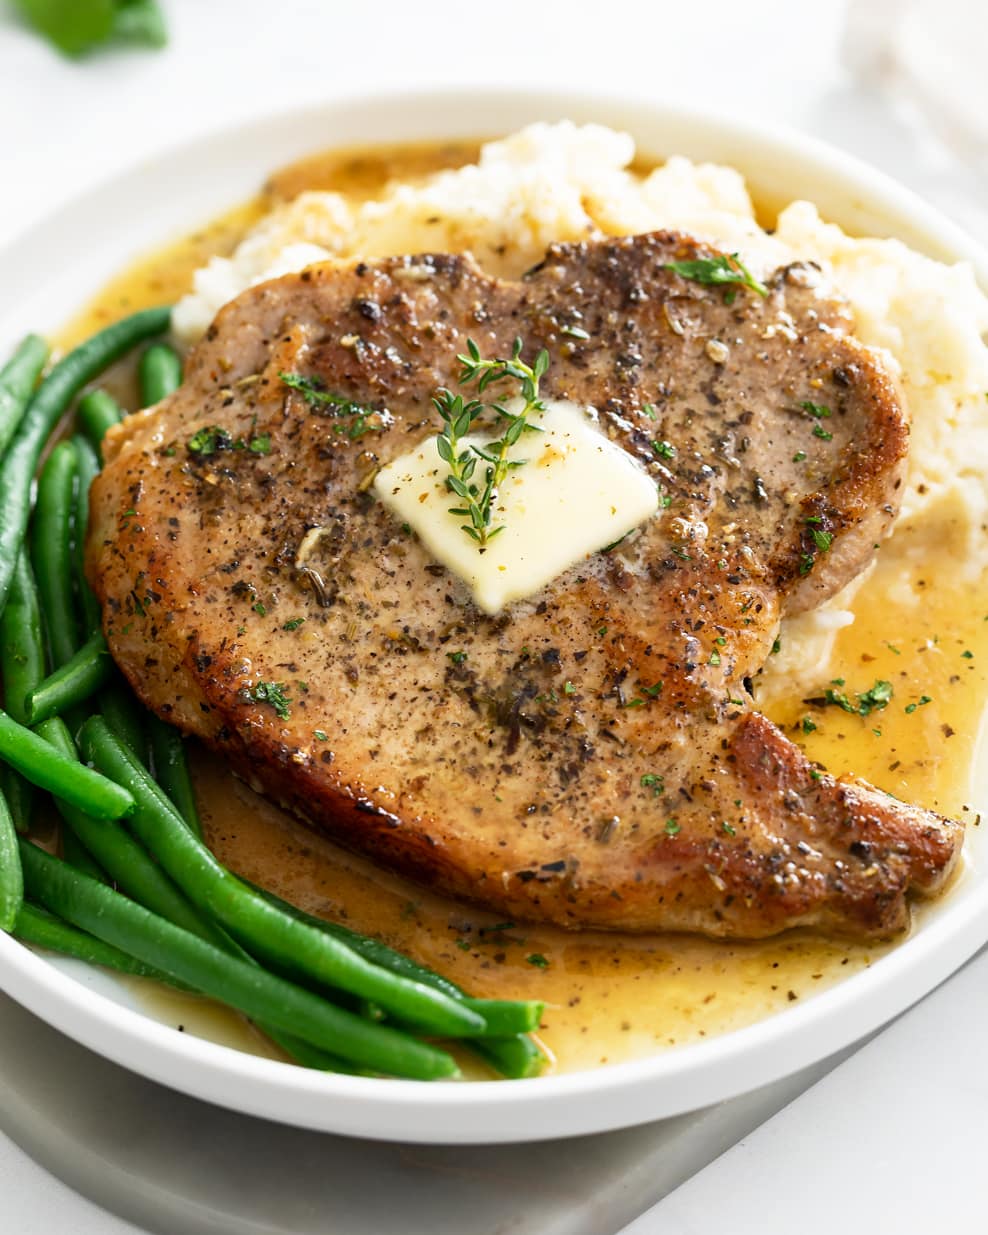 A Pan Fried Pork Chop on a plate with pan juice, mashed potatoes and green beans.